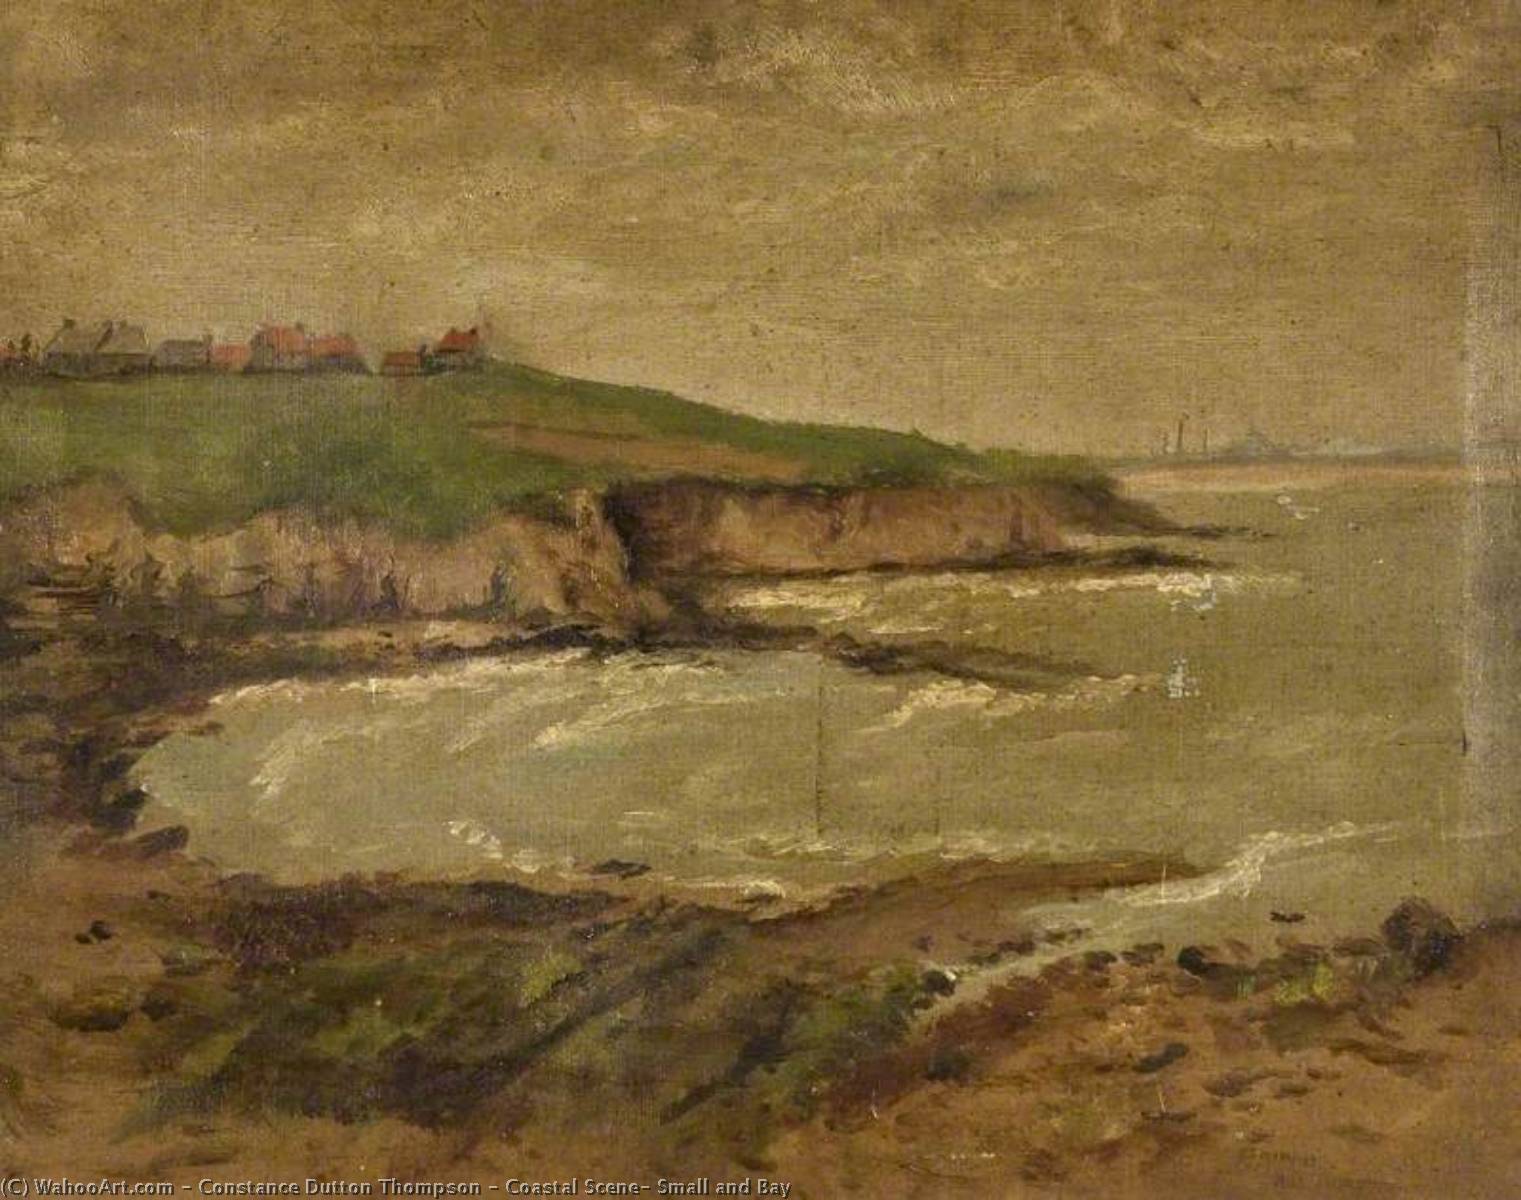 Coastal Scene, Small and Bay, 1908 by Constance Dutton Thompson Constance Dutton Thompson | ArtsDot.com